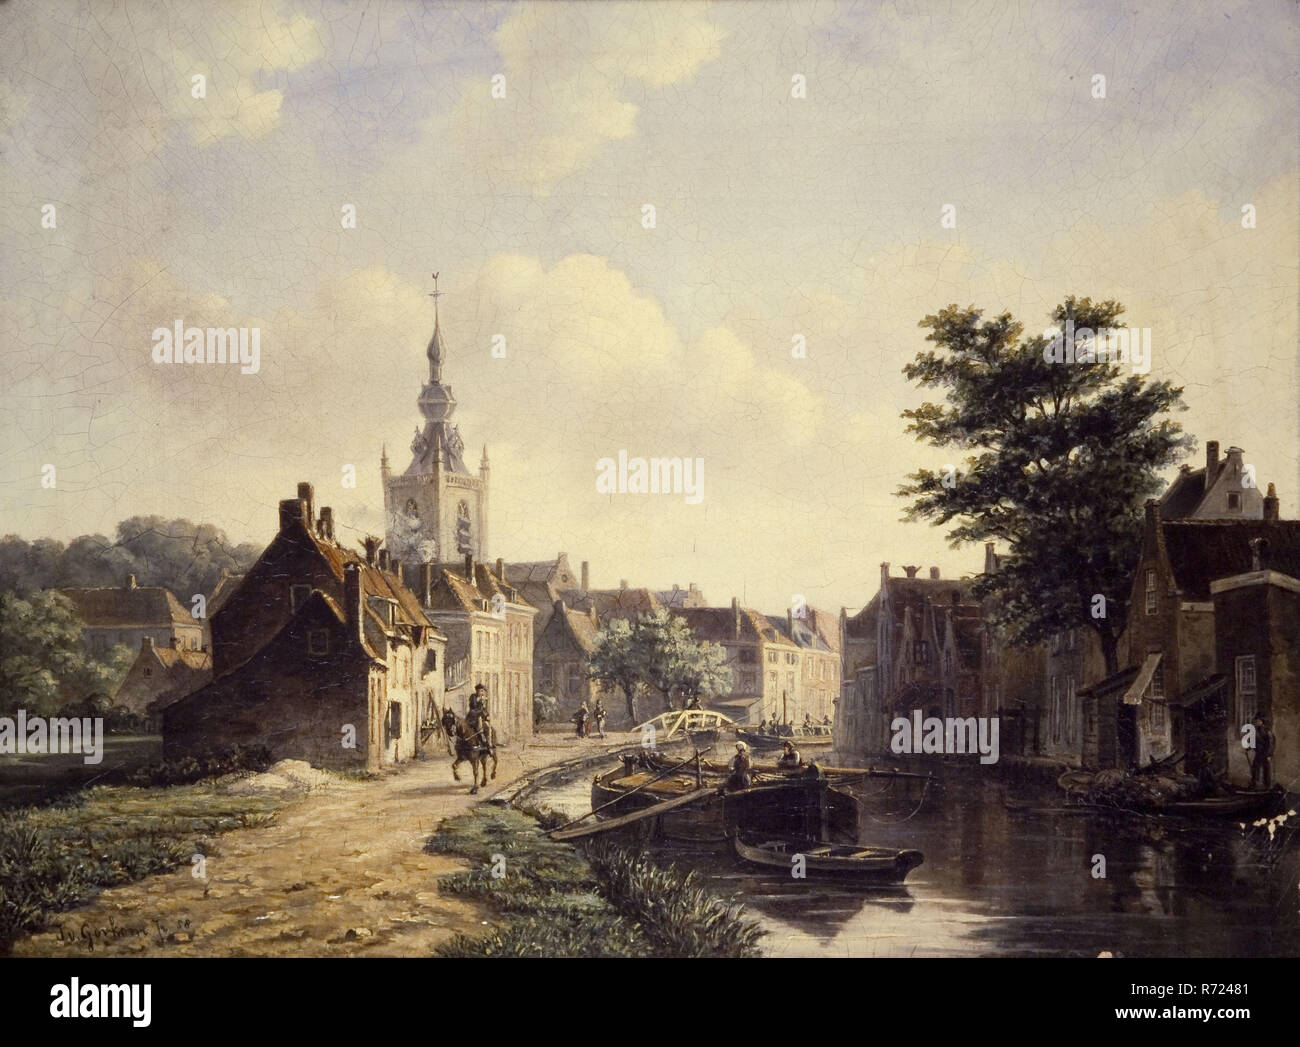 Jacobus van Gorkom jr., View of Overschie with left dike street and right canal, Rotterdam, village view painting footage linen paint oil paint wood gold plaster, Cityscape Overschie with the Schie on the right where barge and left the Kleinpolderkade with rider on horseback Cloth in ornamented gilded frame rectangular lying format lower left signature: Jacobus van Gorkom jr 1858 village view topography Overschie Schie Rotterdam Stock Photo